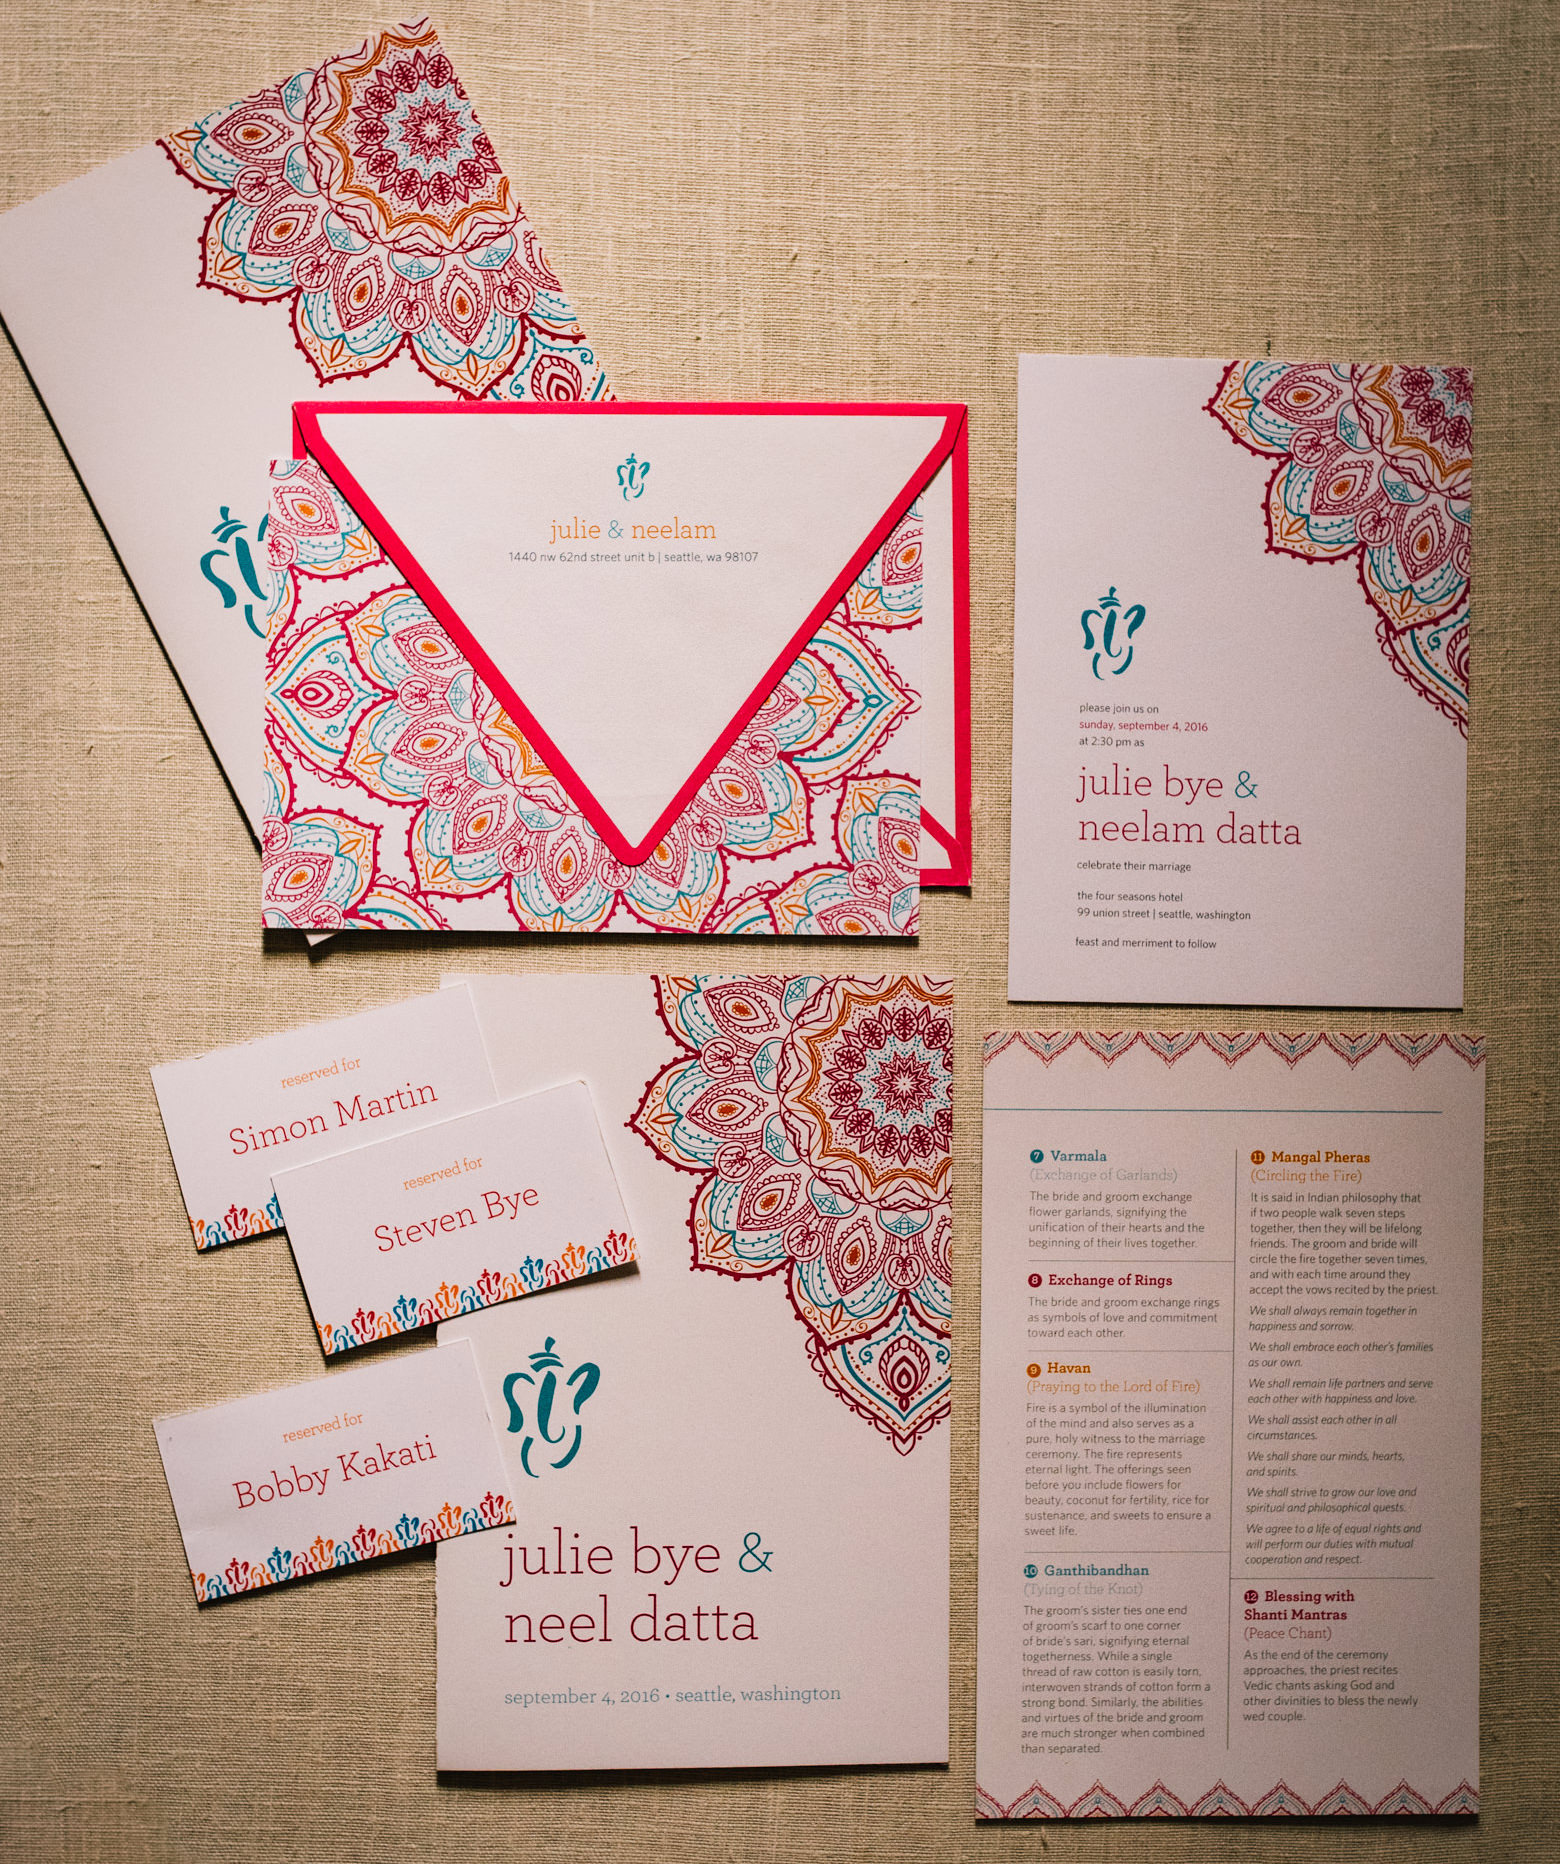 Julie and Neel's wedding paper inspiration for their Hindu Japanese weddings